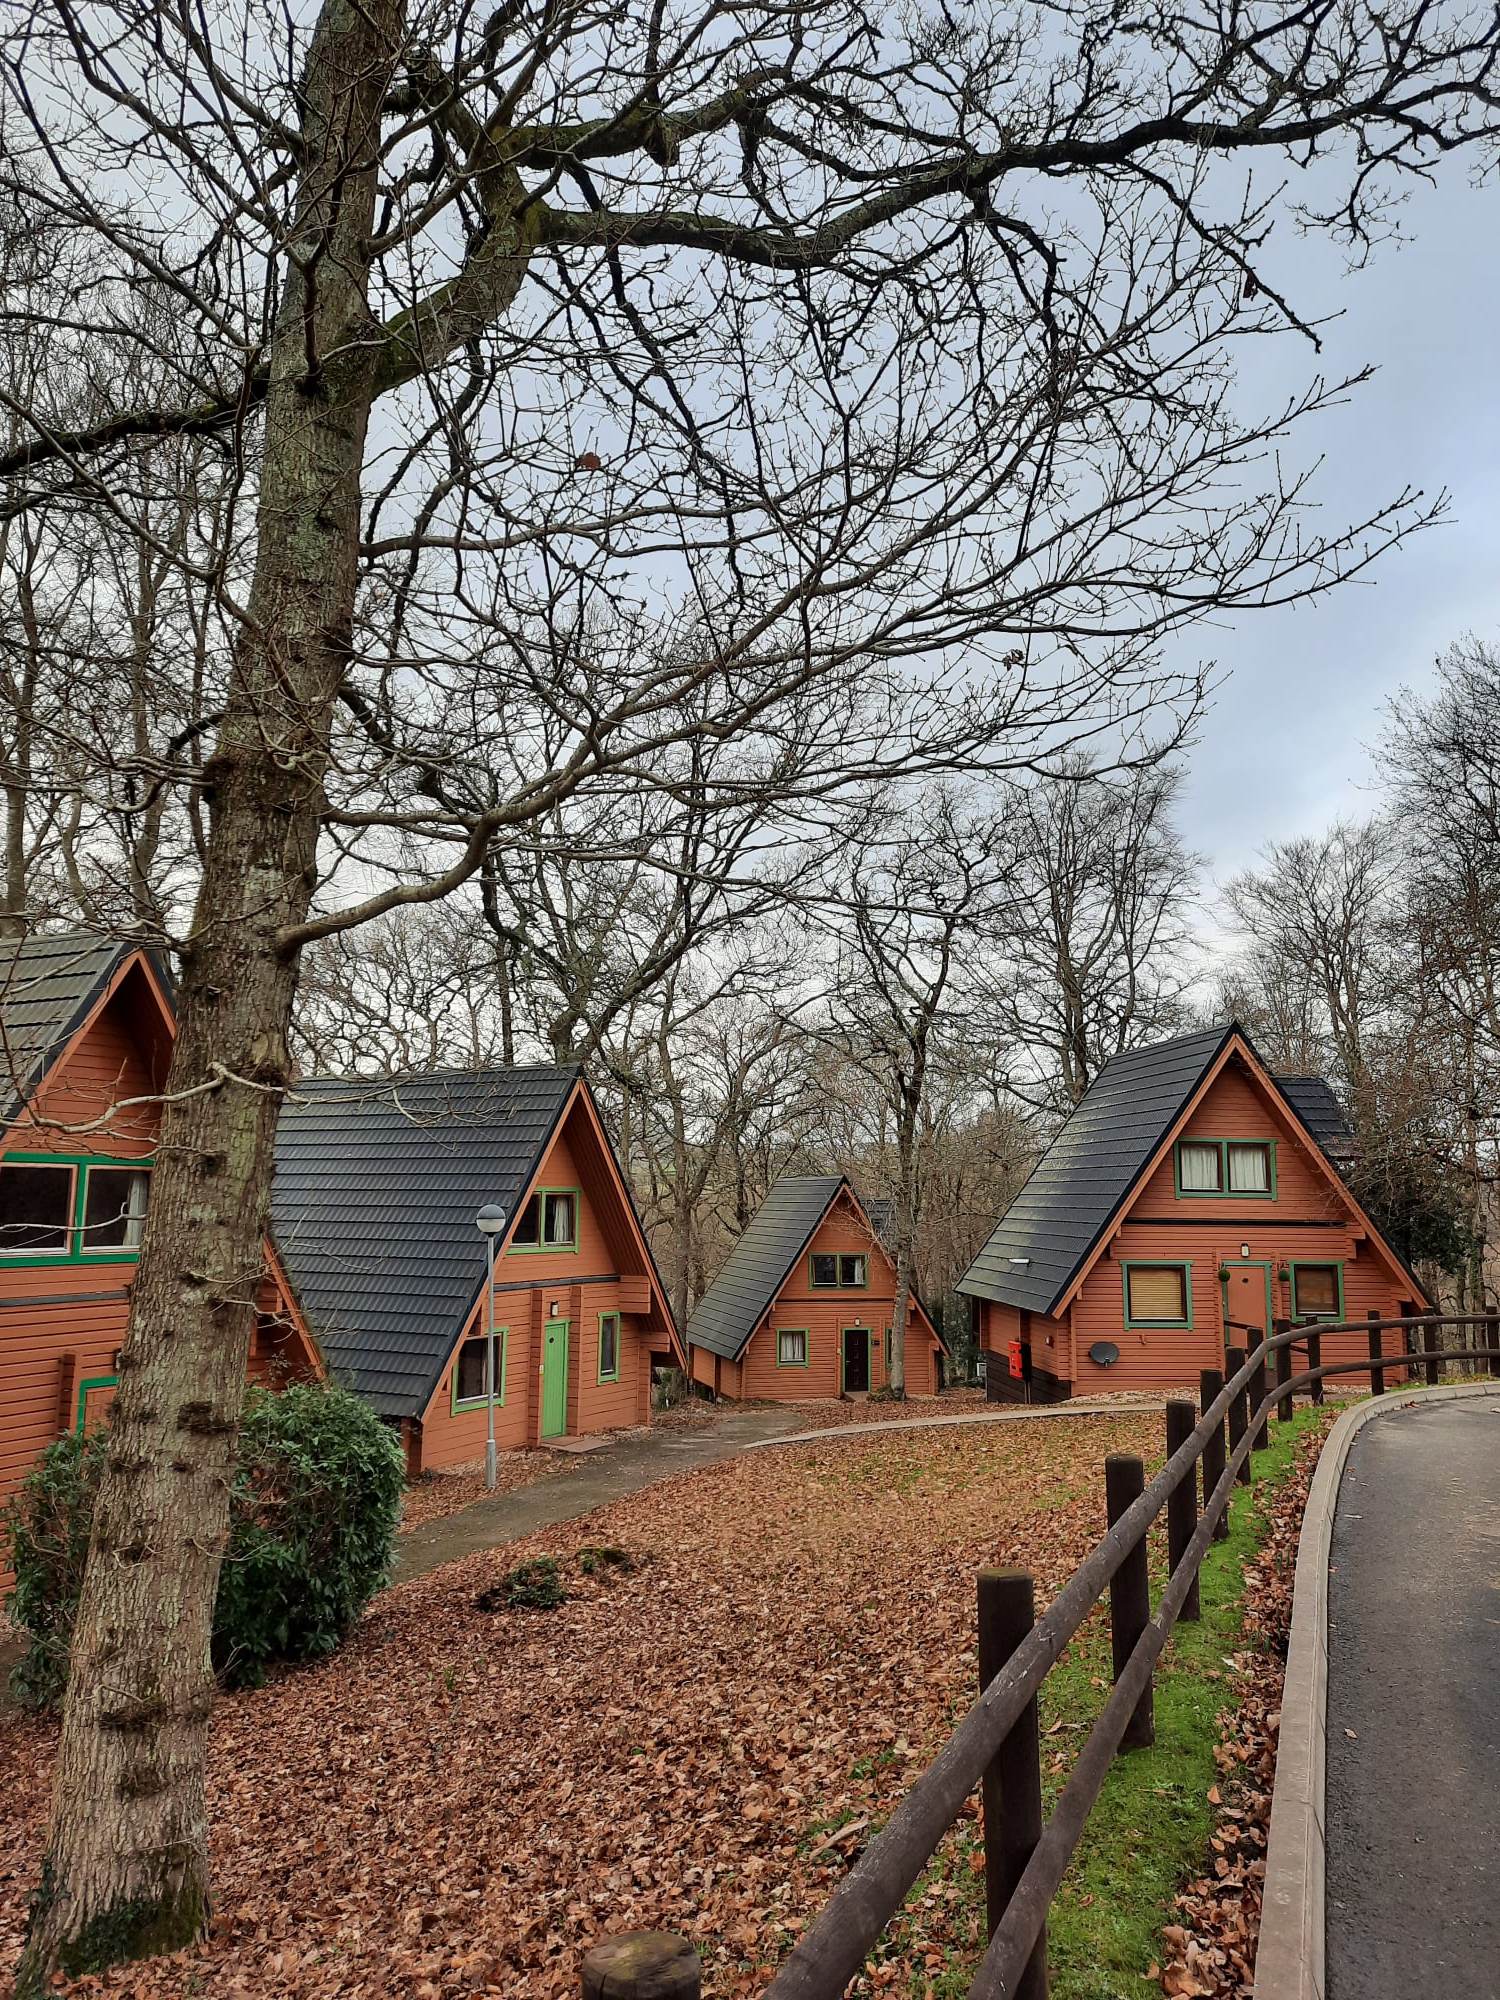 Finlake Resort A-frame accommodation in woodland